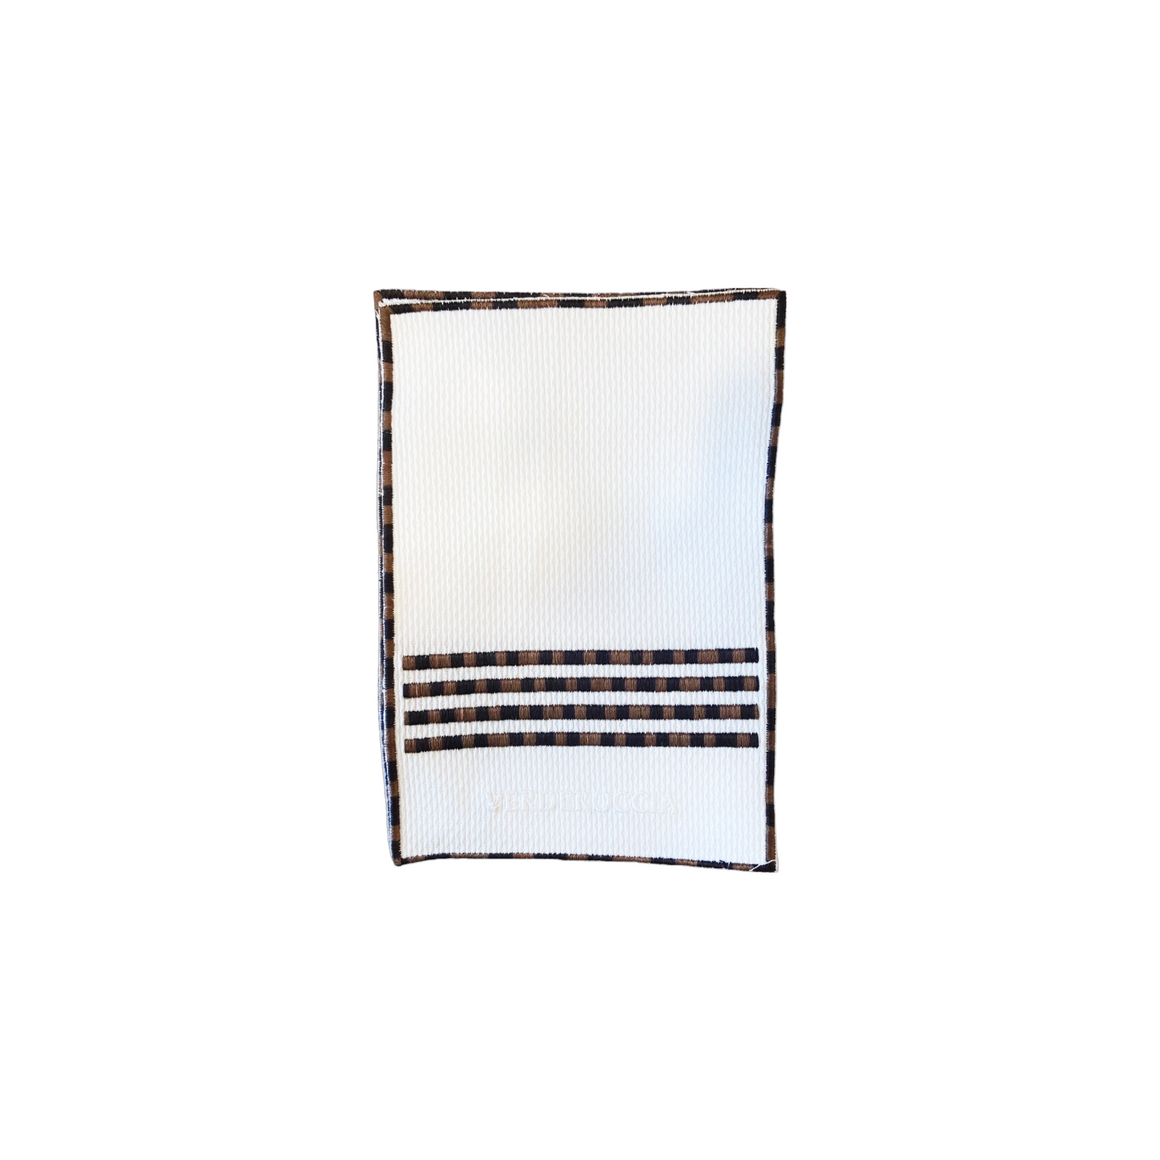 White Pique Cocktail Napkins with Brown/Camel/Begie Ombre Embroidered Trim Danielle Rollins Cocktail Napkins, Set of 4